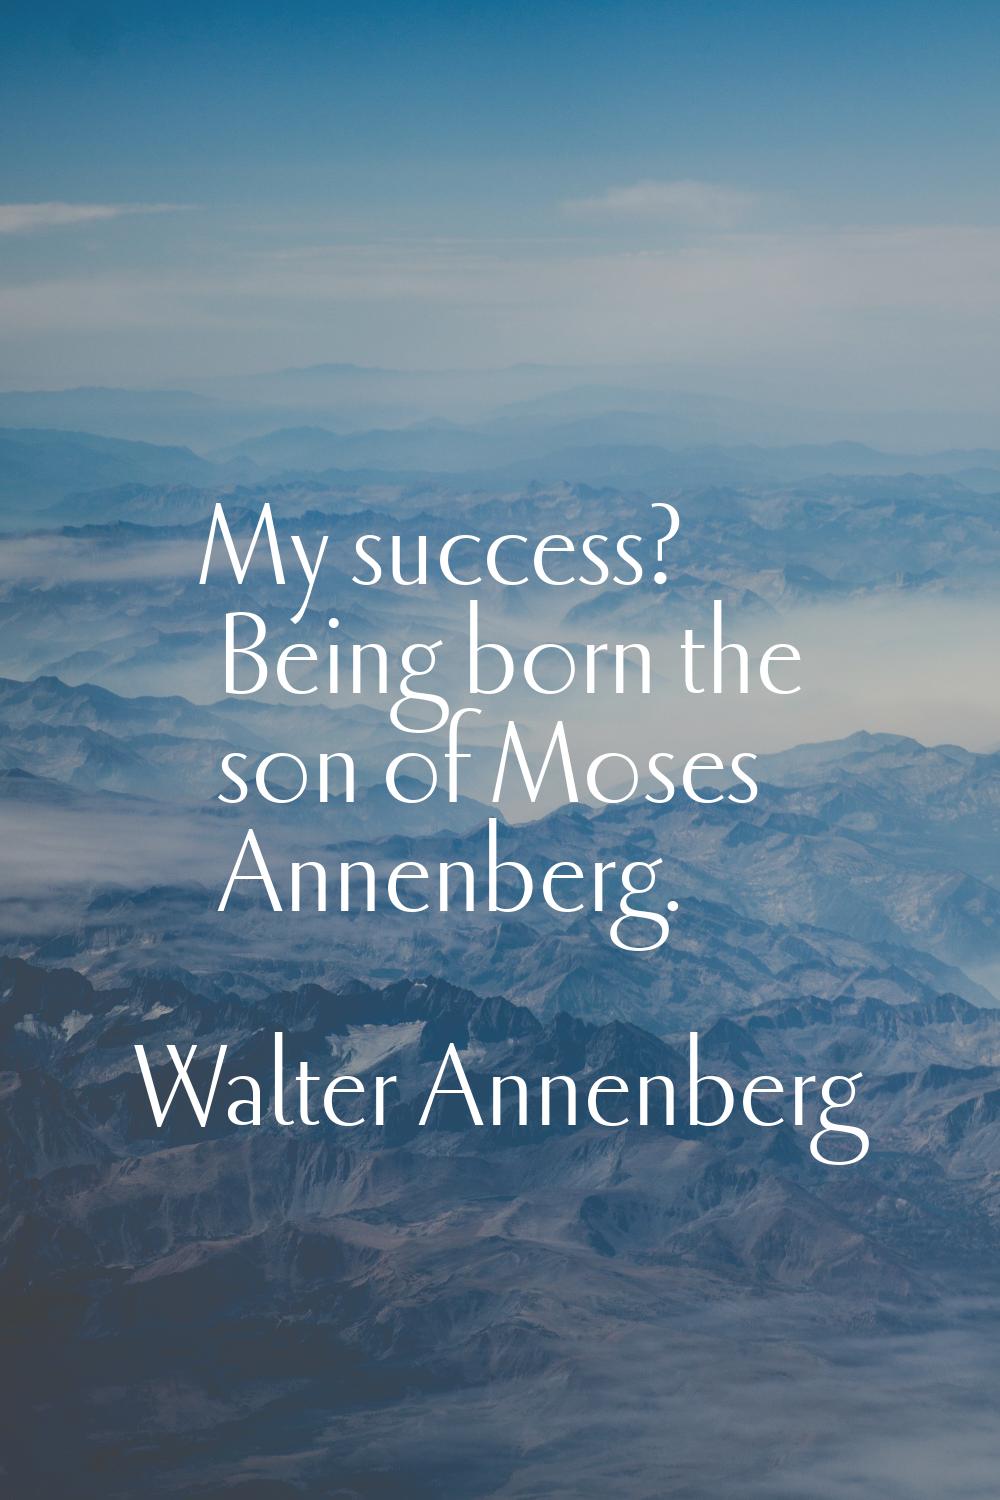 My success? Being born the son of Moses Annenberg.